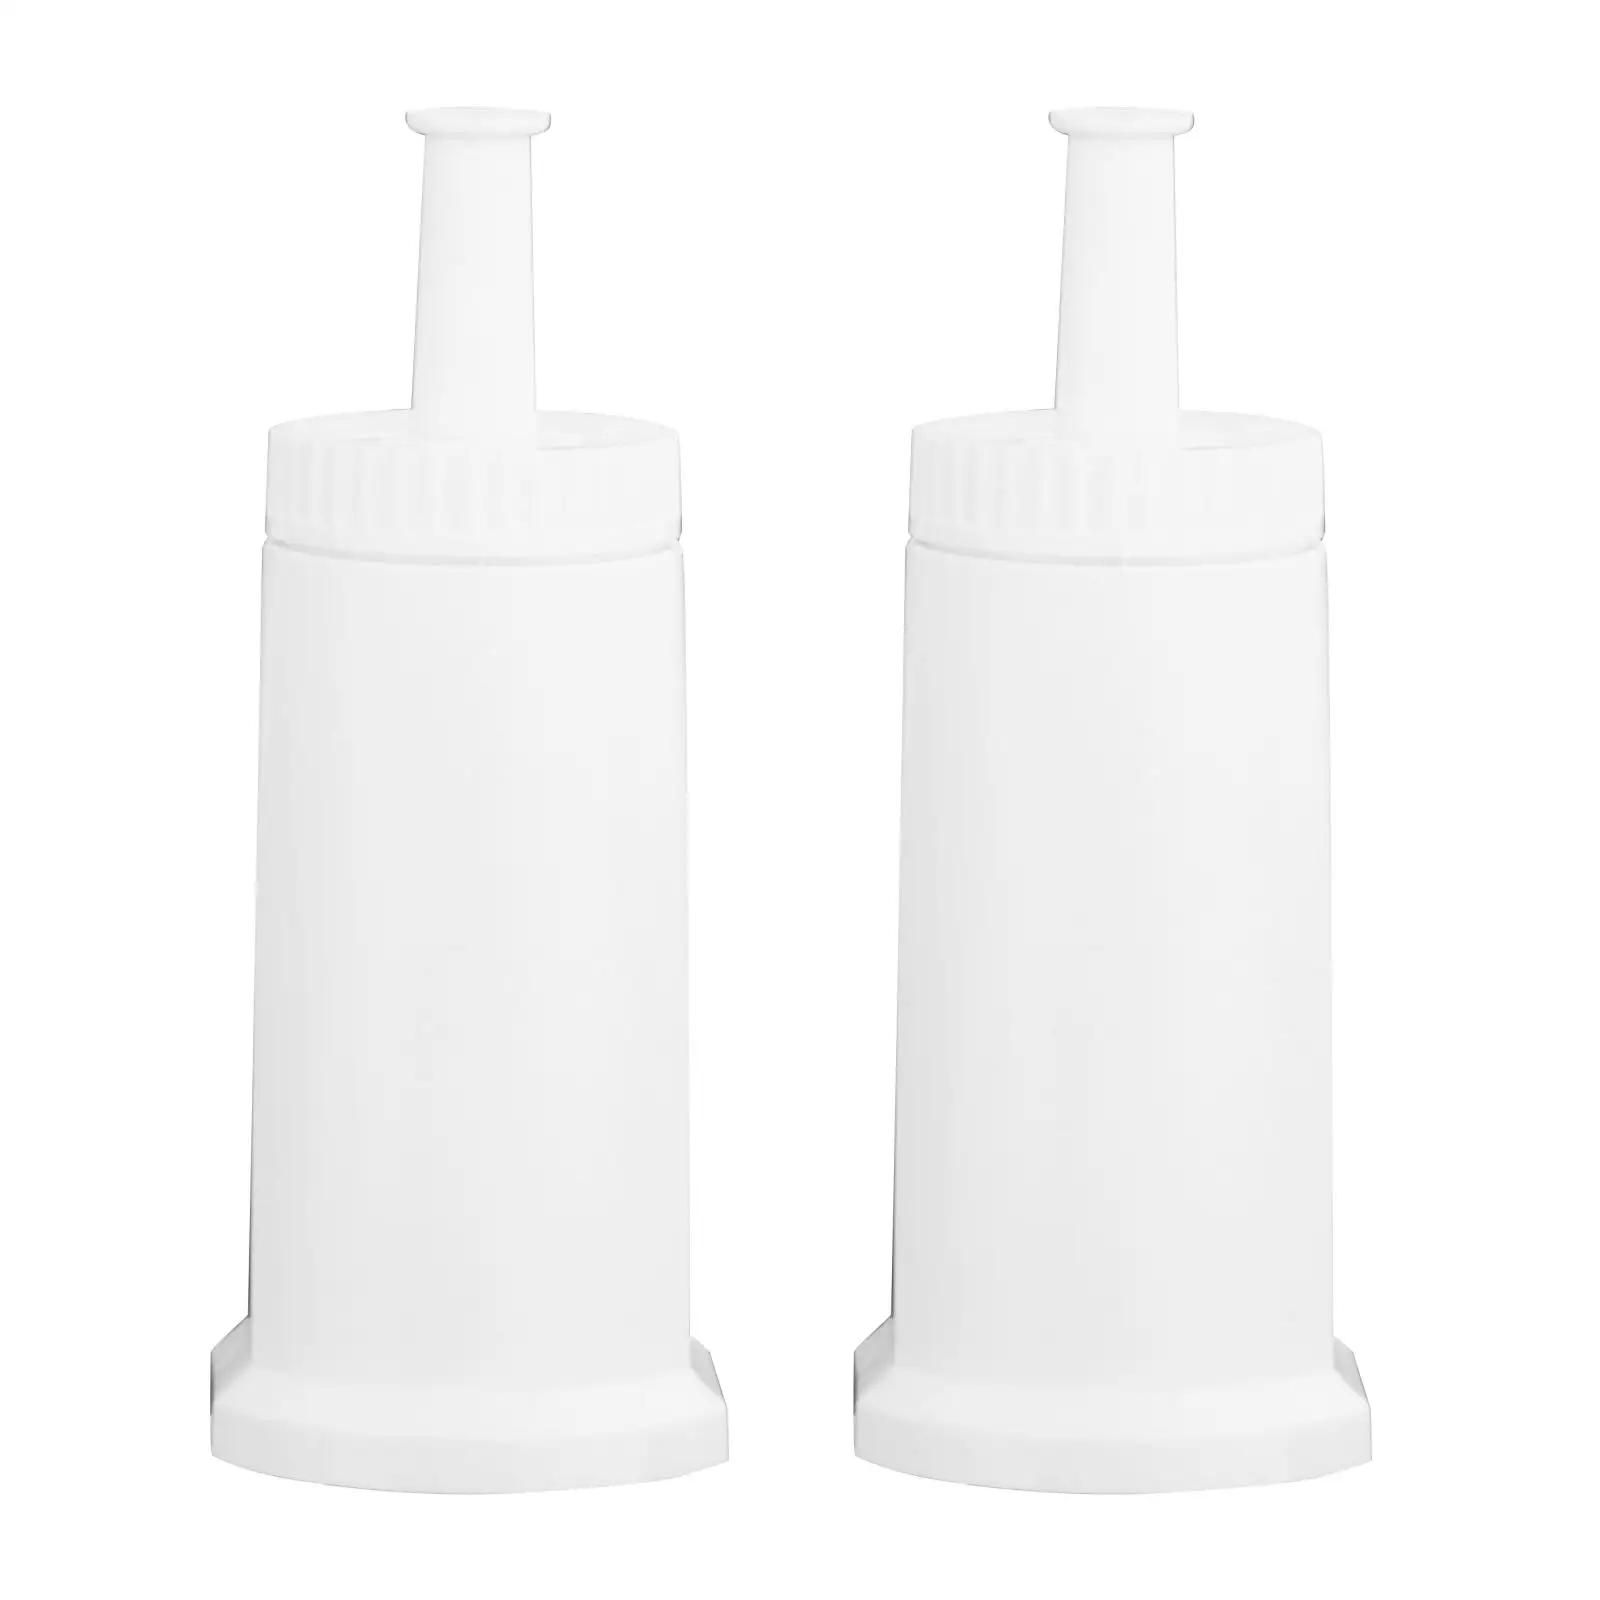 2 Pack Replacement Water Filter for Sage Claro Swiss Oracle Barista Bambino Espresso Coffee Machine